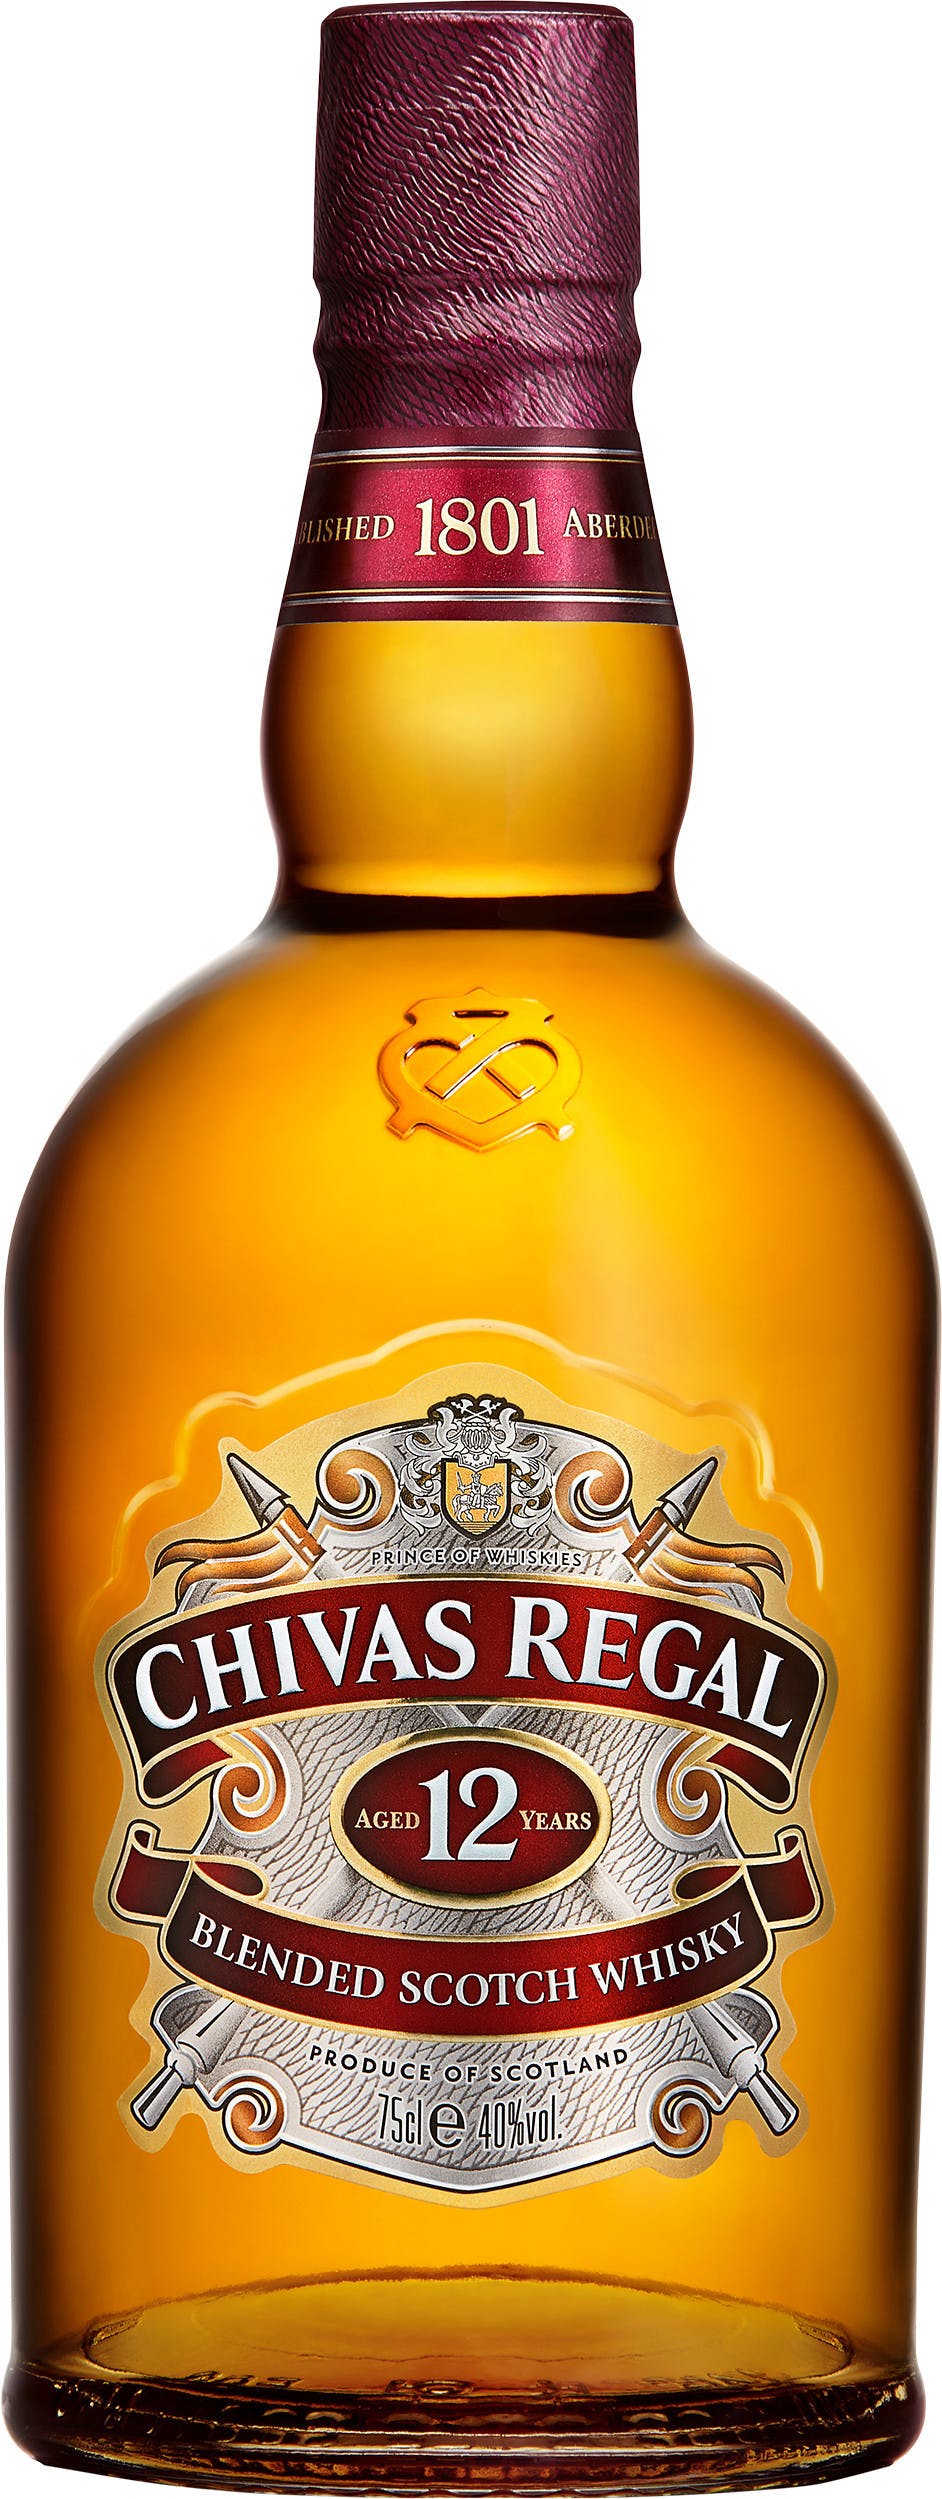 Chivas Regal Blended Garden Scotch year 750ml Liquors State Whisky Discount - 12 old